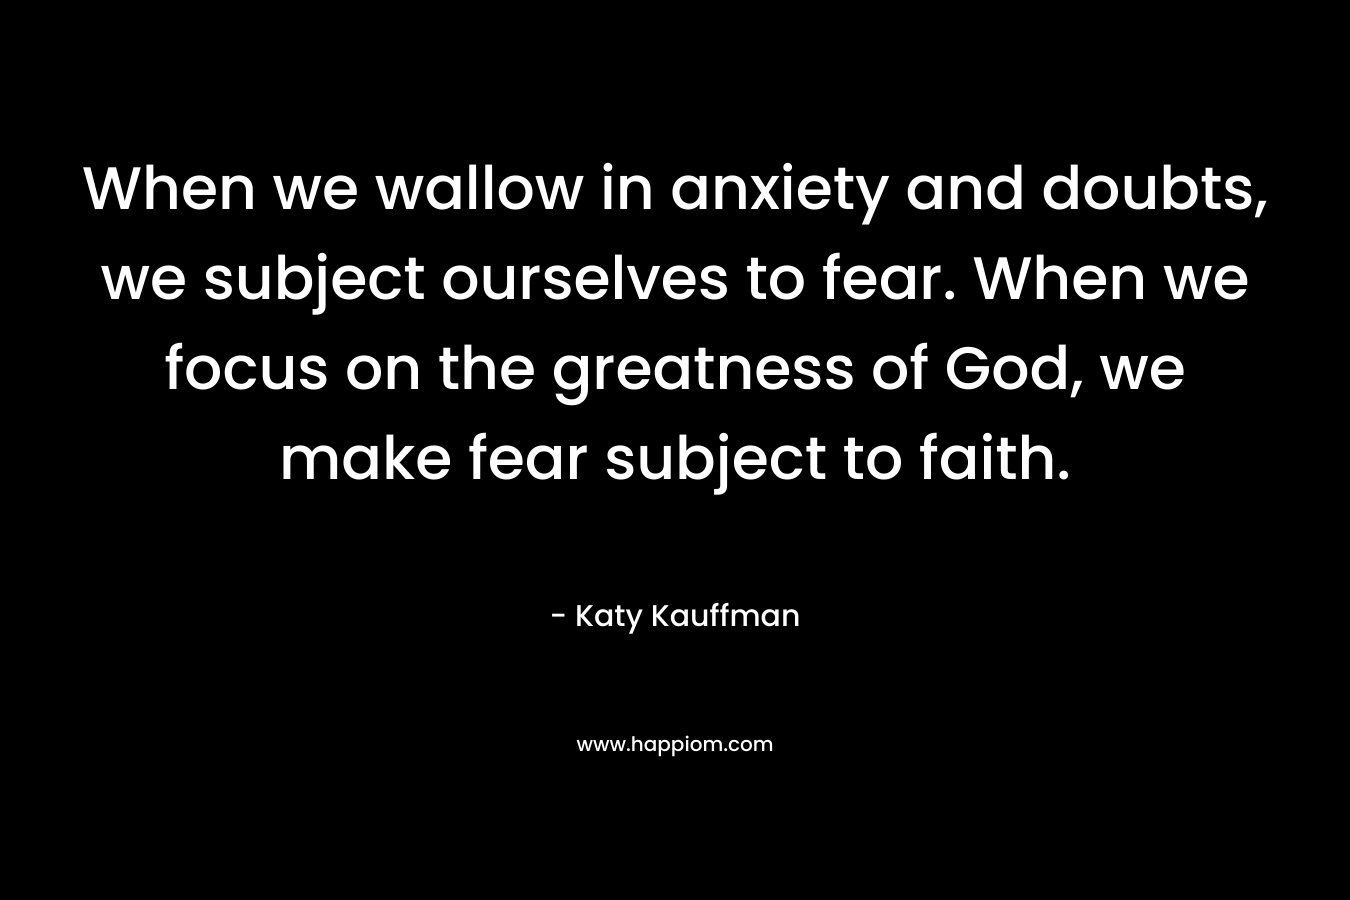 When we wallow in anxiety and doubts, we subject ourselves to fear. When we focus on the greatness of God, we make fear subject to faith. – Katy Kauffman